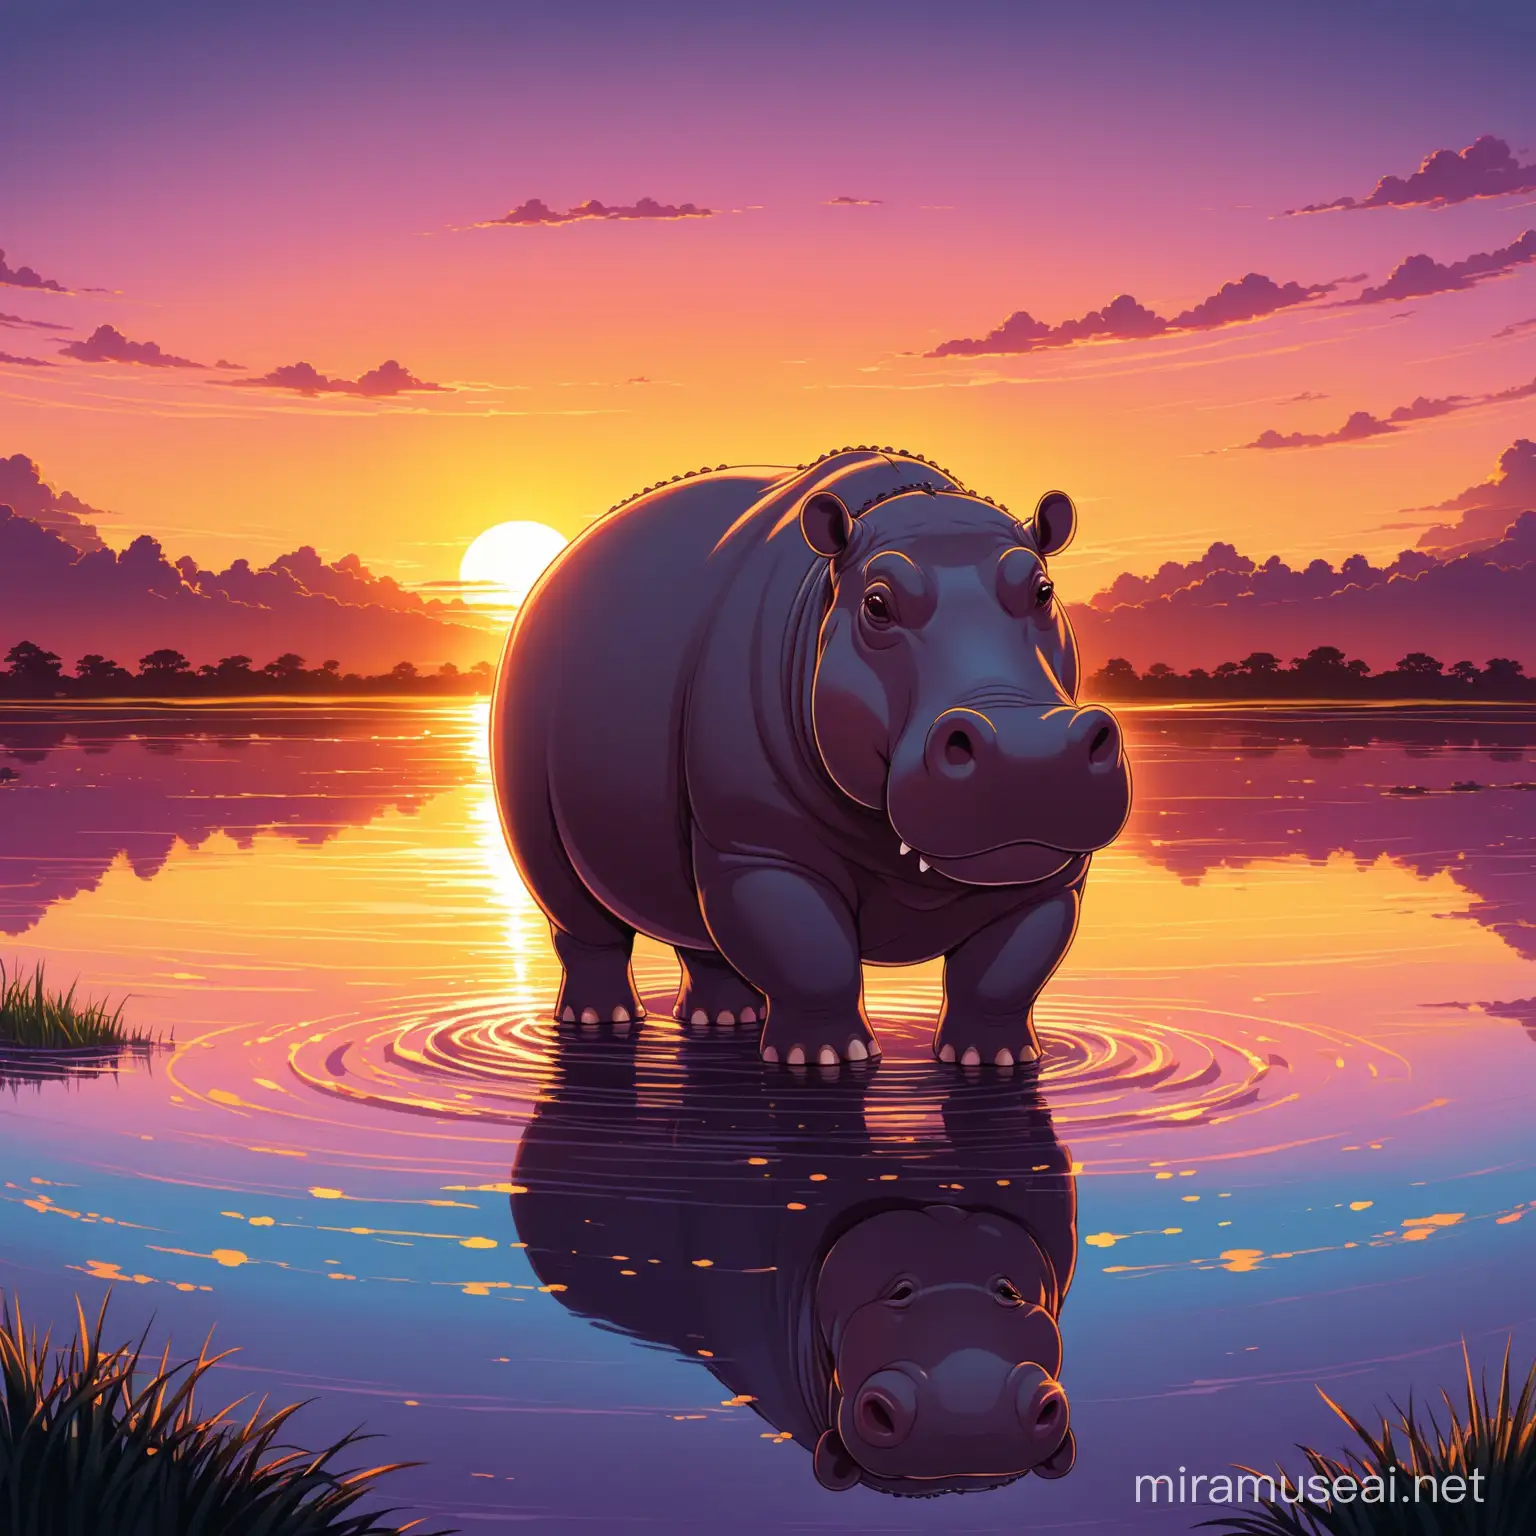 Hippo Silhouetted Against Majestic Sunset